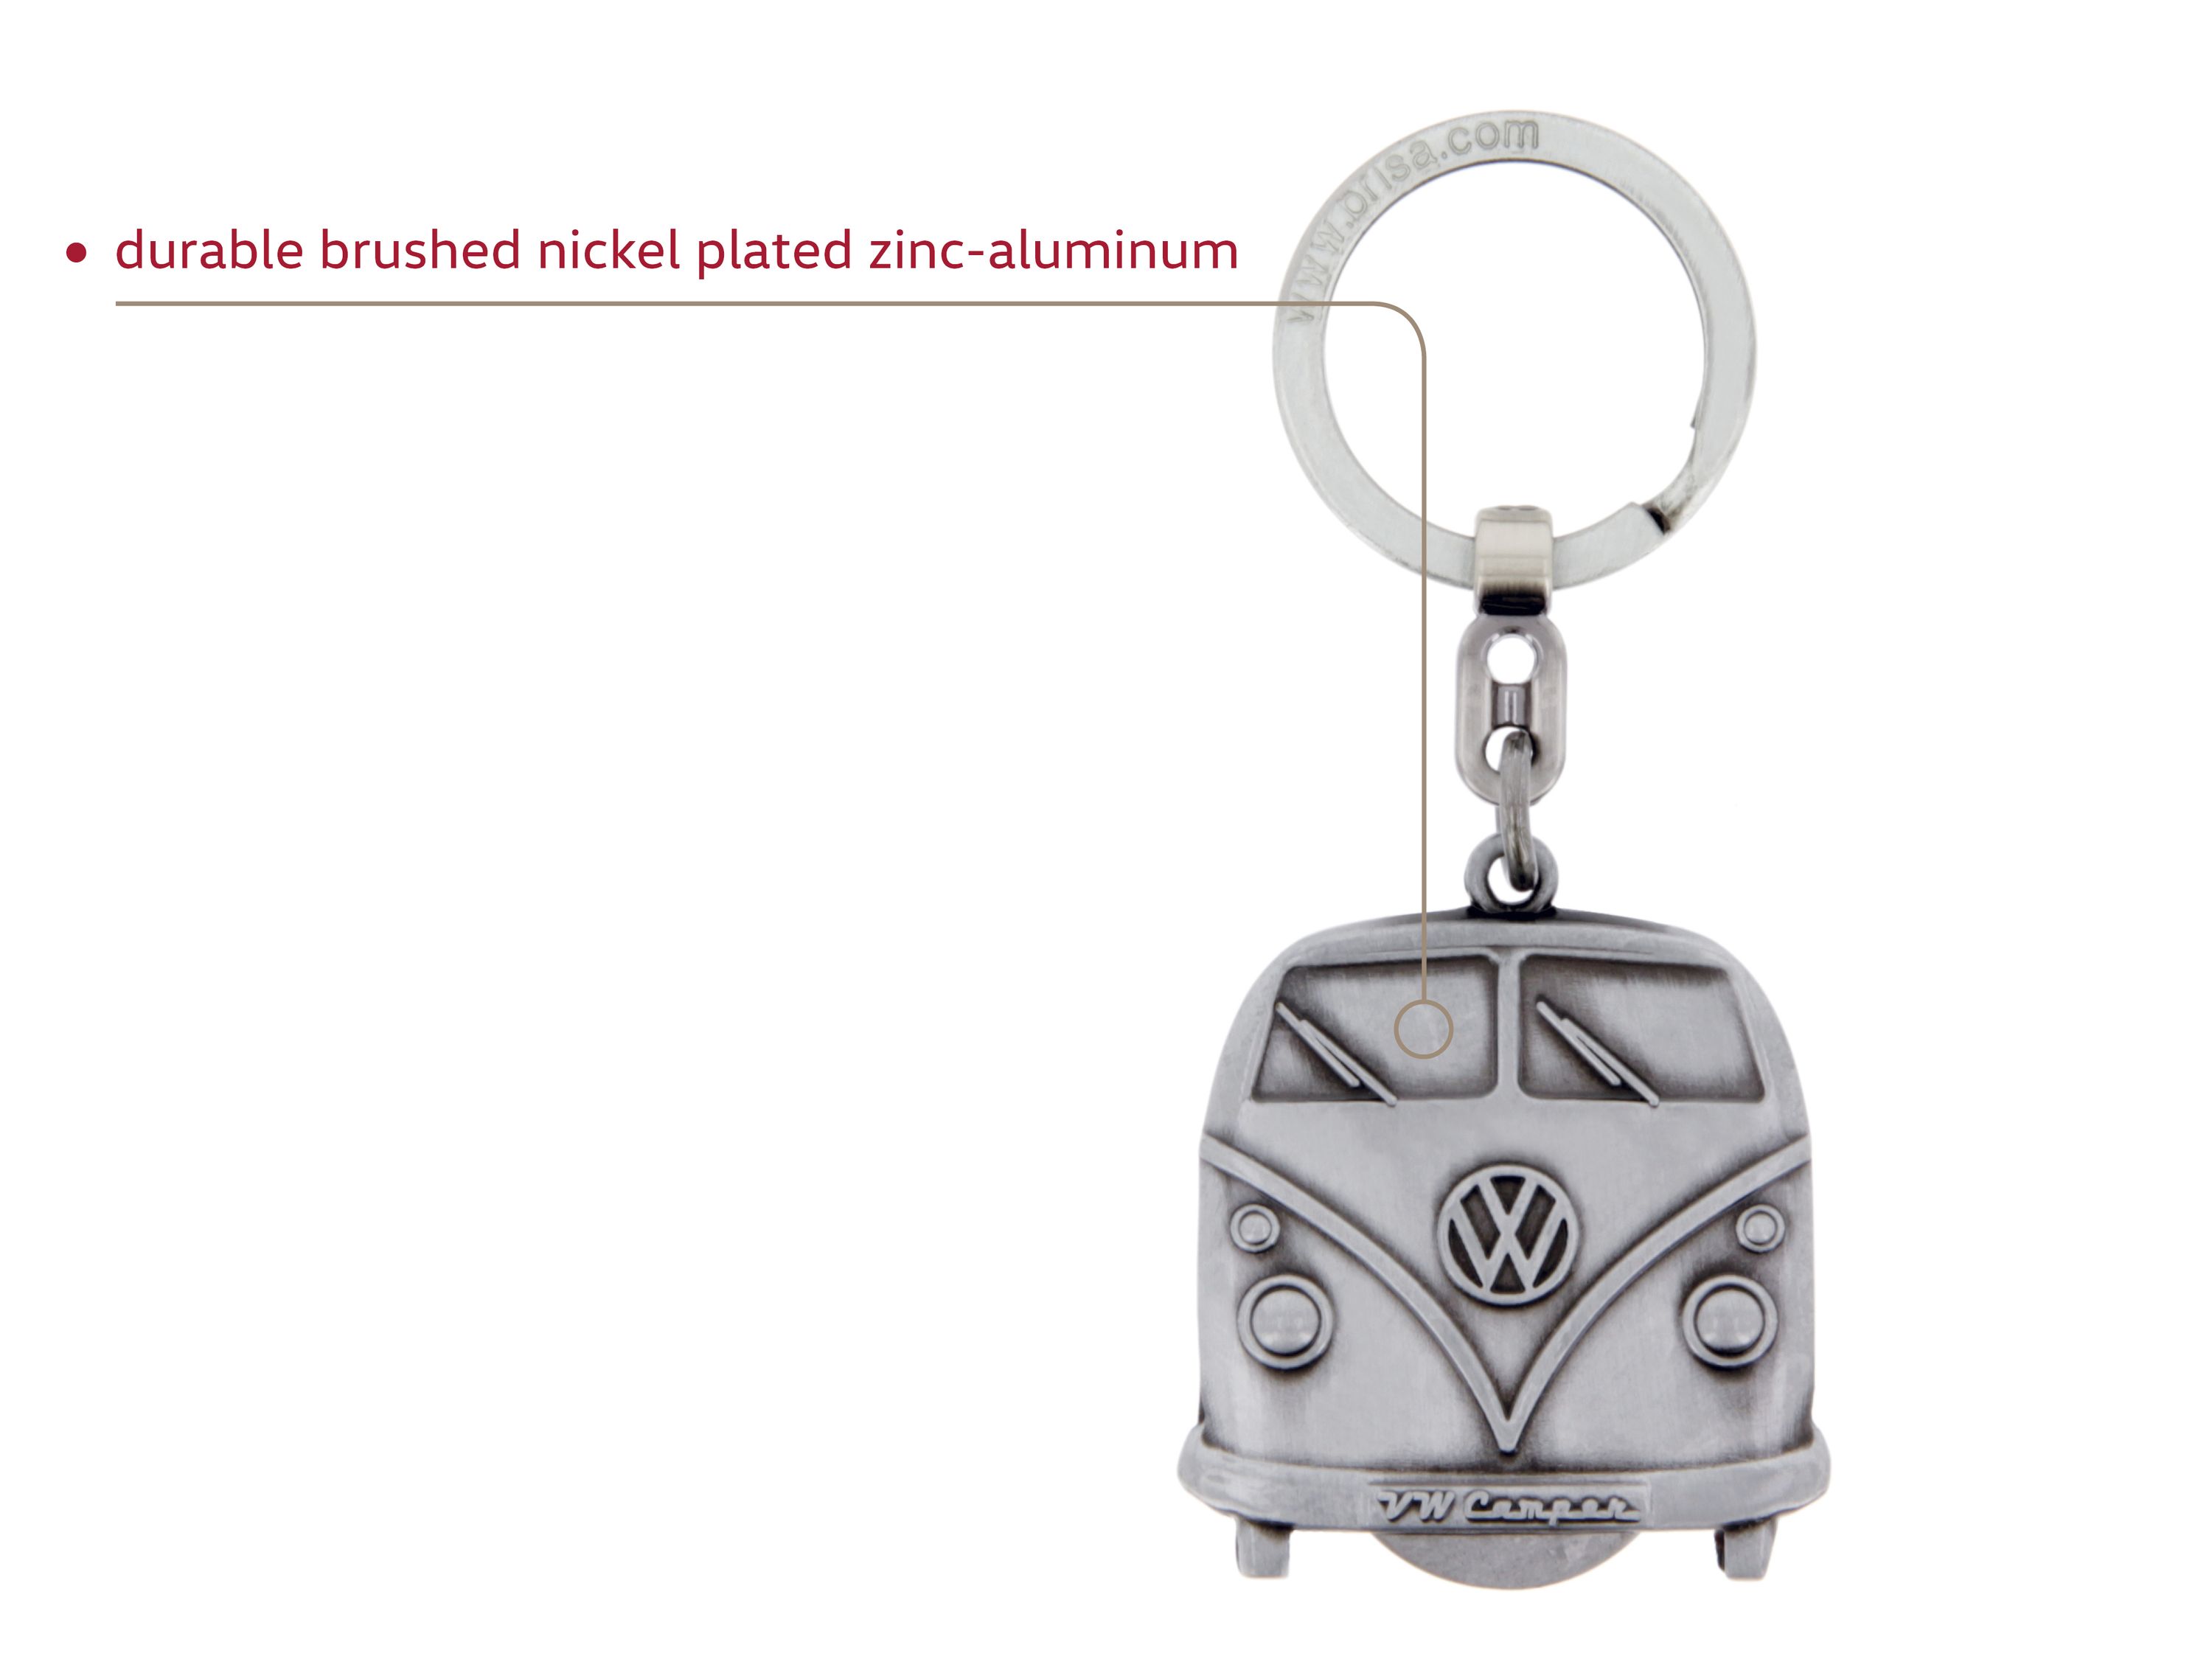 VW T1 Bulli bus keychain with shopping cart chip in gift box - antique silver look
